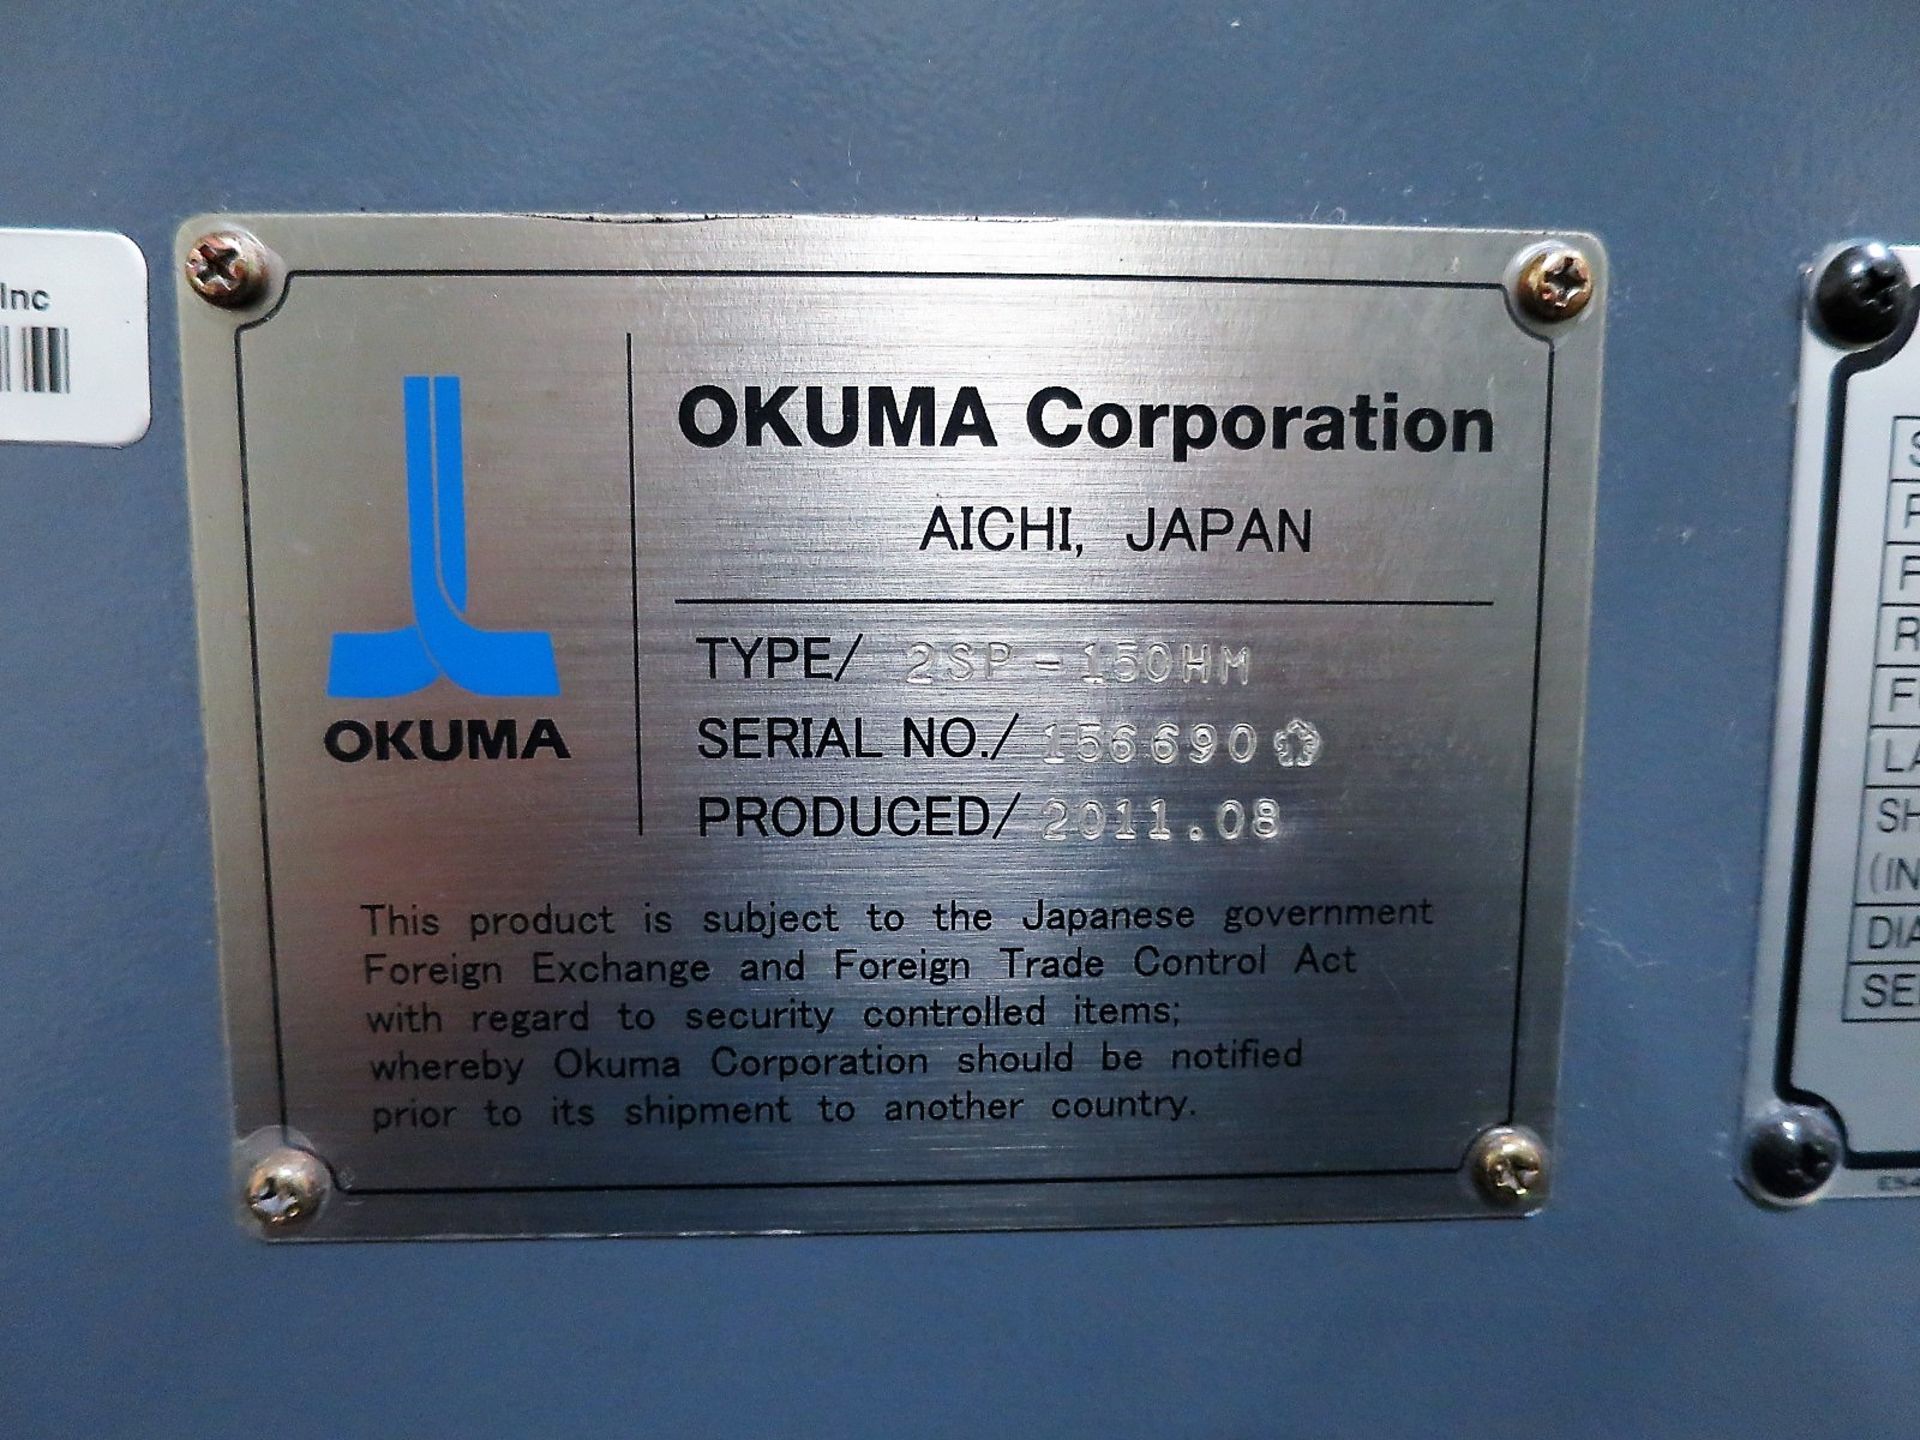 OKUMA 2SP-150HM TWIN SPINDLE 3-AXIS TURNING CENTER W/LIVE MILLING, S/N 156690, NEW 2011 - Image 10 of 11